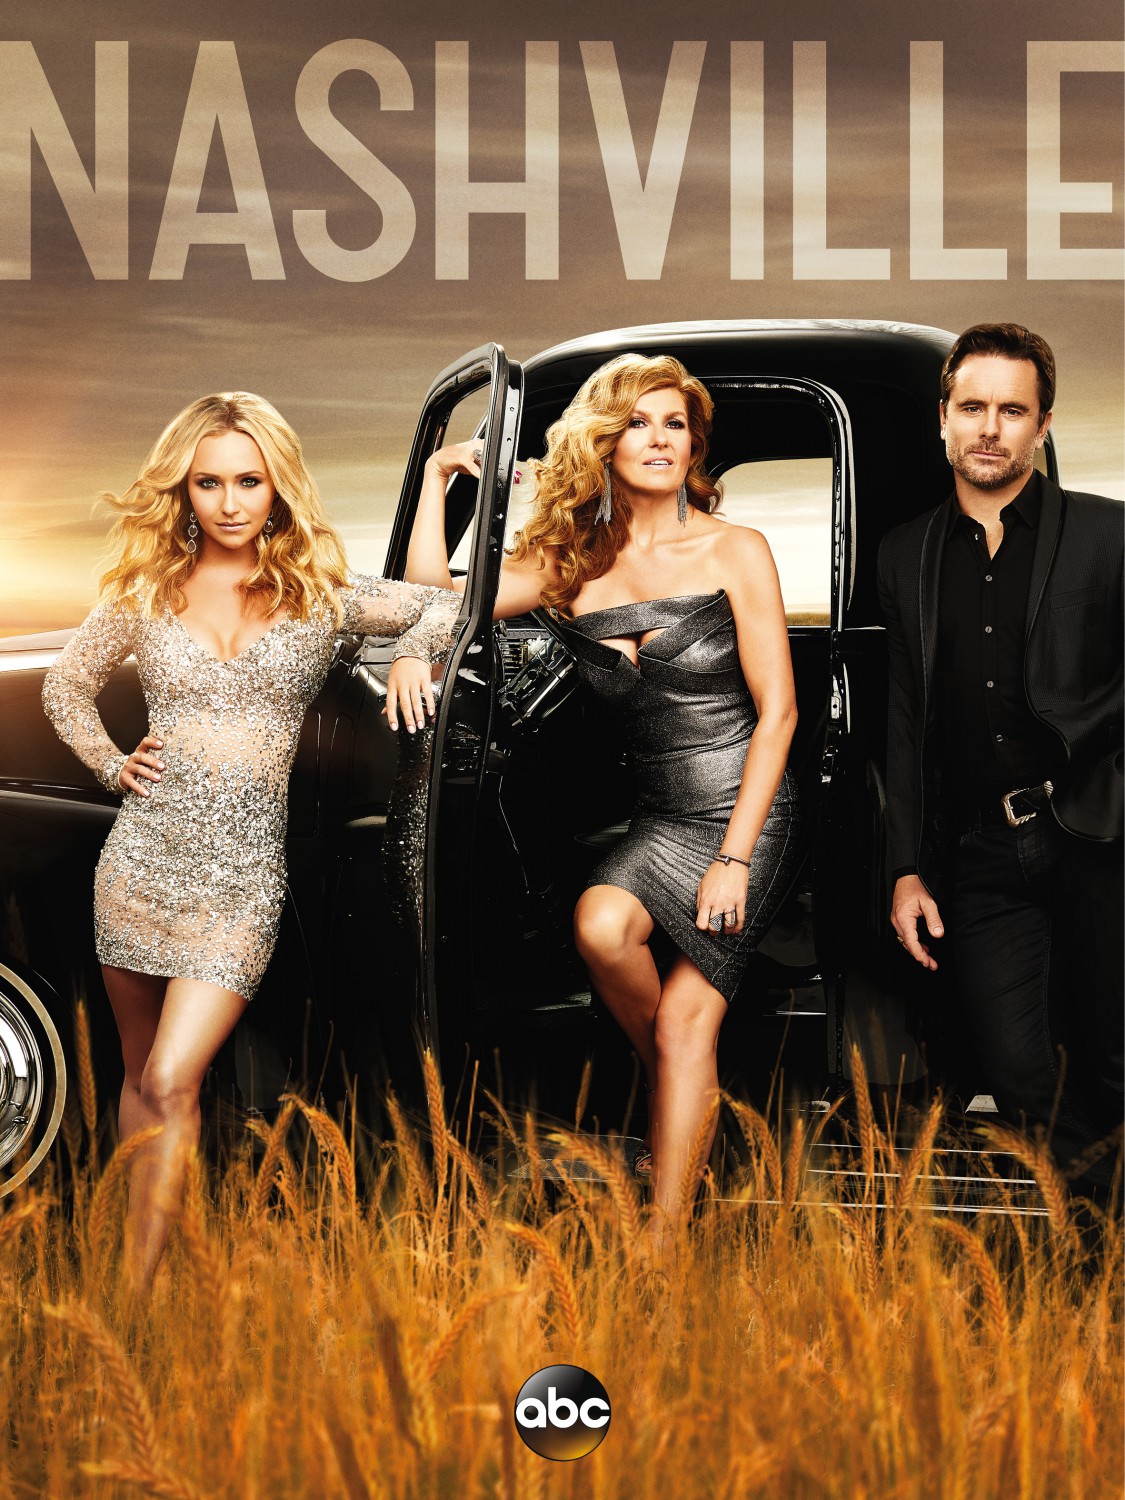 Extra Large Movie Poster Image for Nashville (#4 of 5)